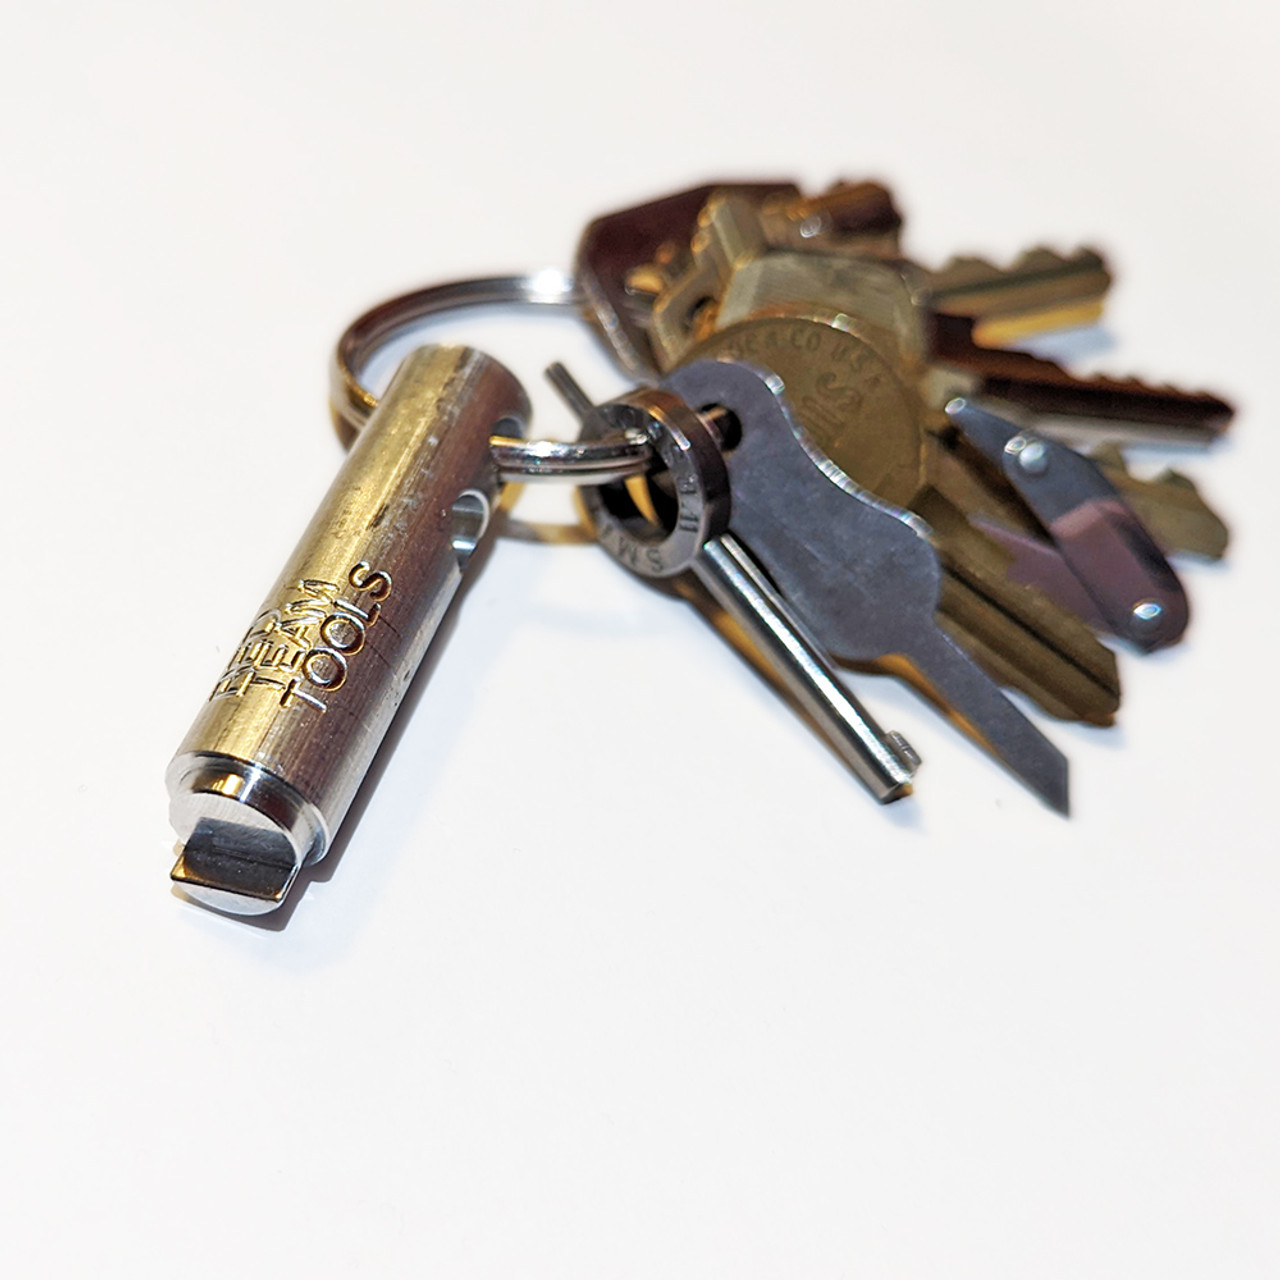 Keychain for keys. Property protection lock with colored keychains